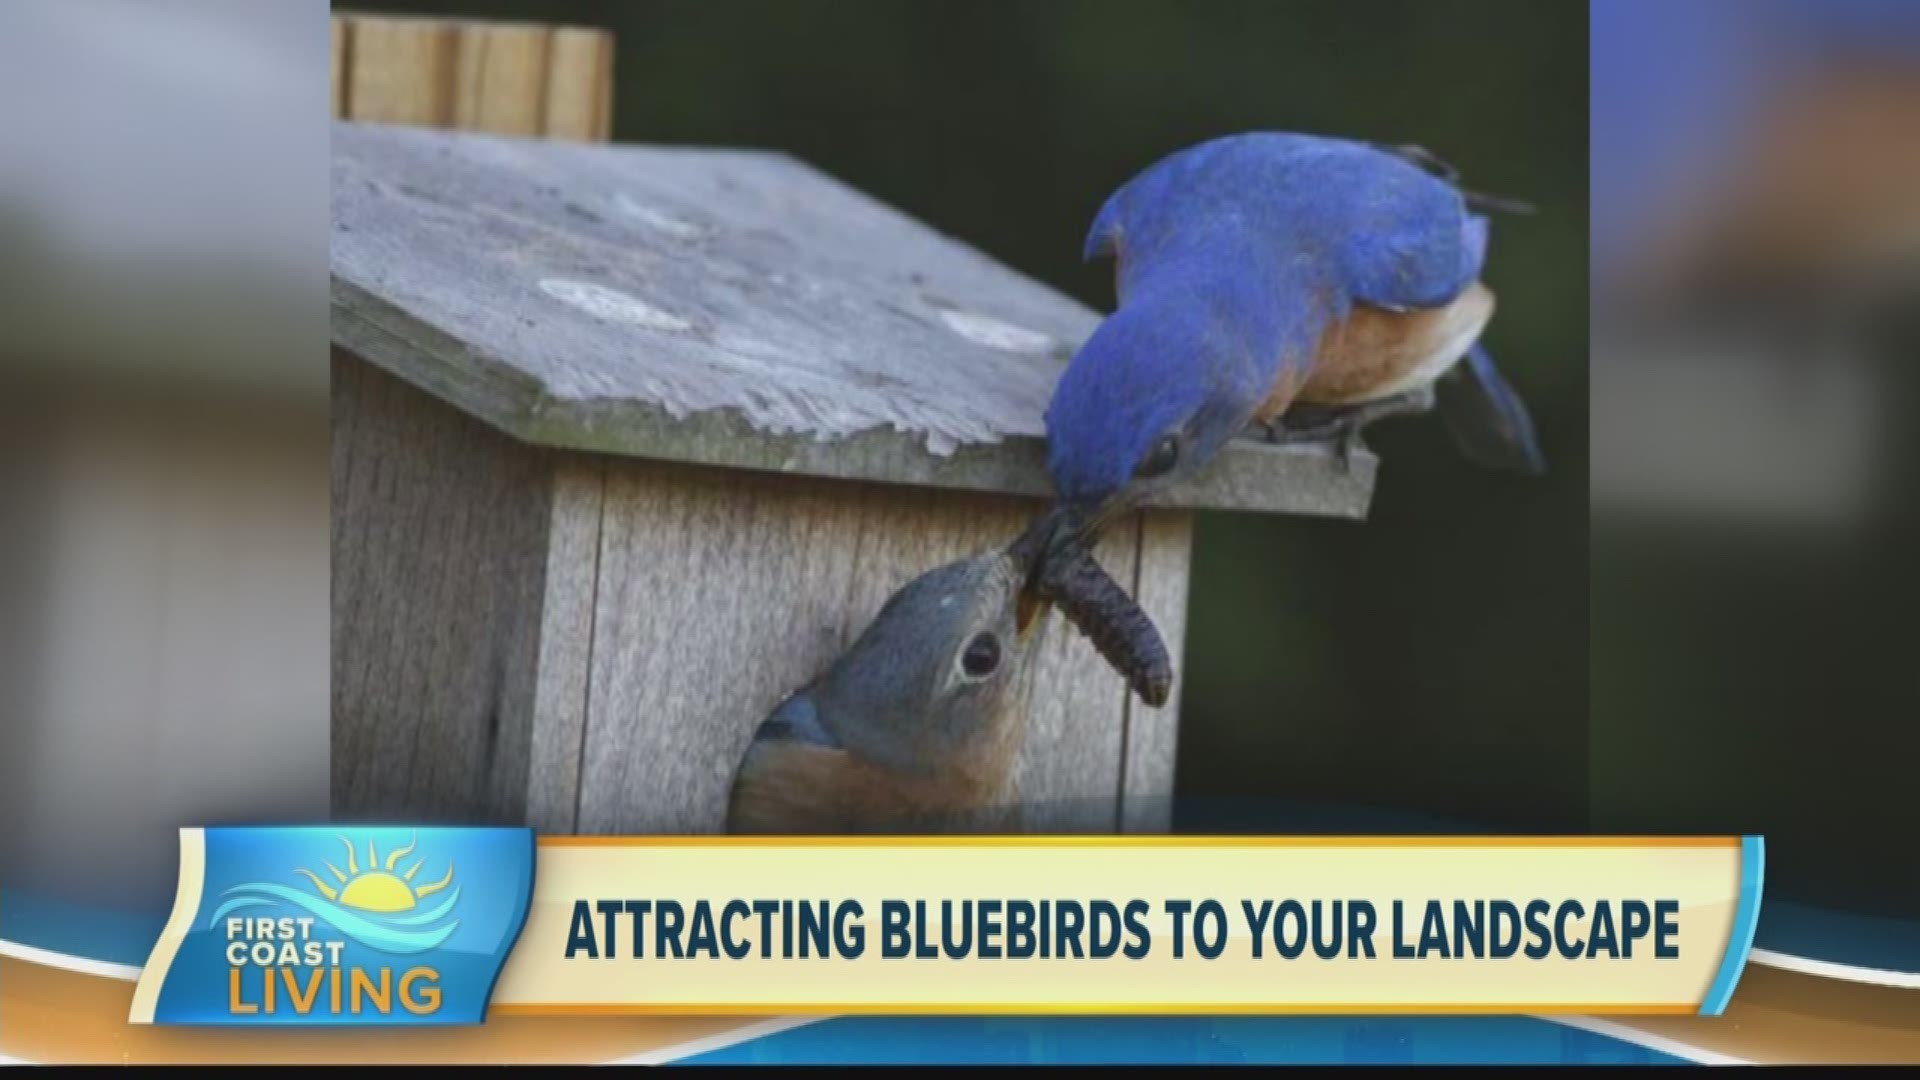 Learn more about beautiful bluebirds and how you can attract them to your landscape.